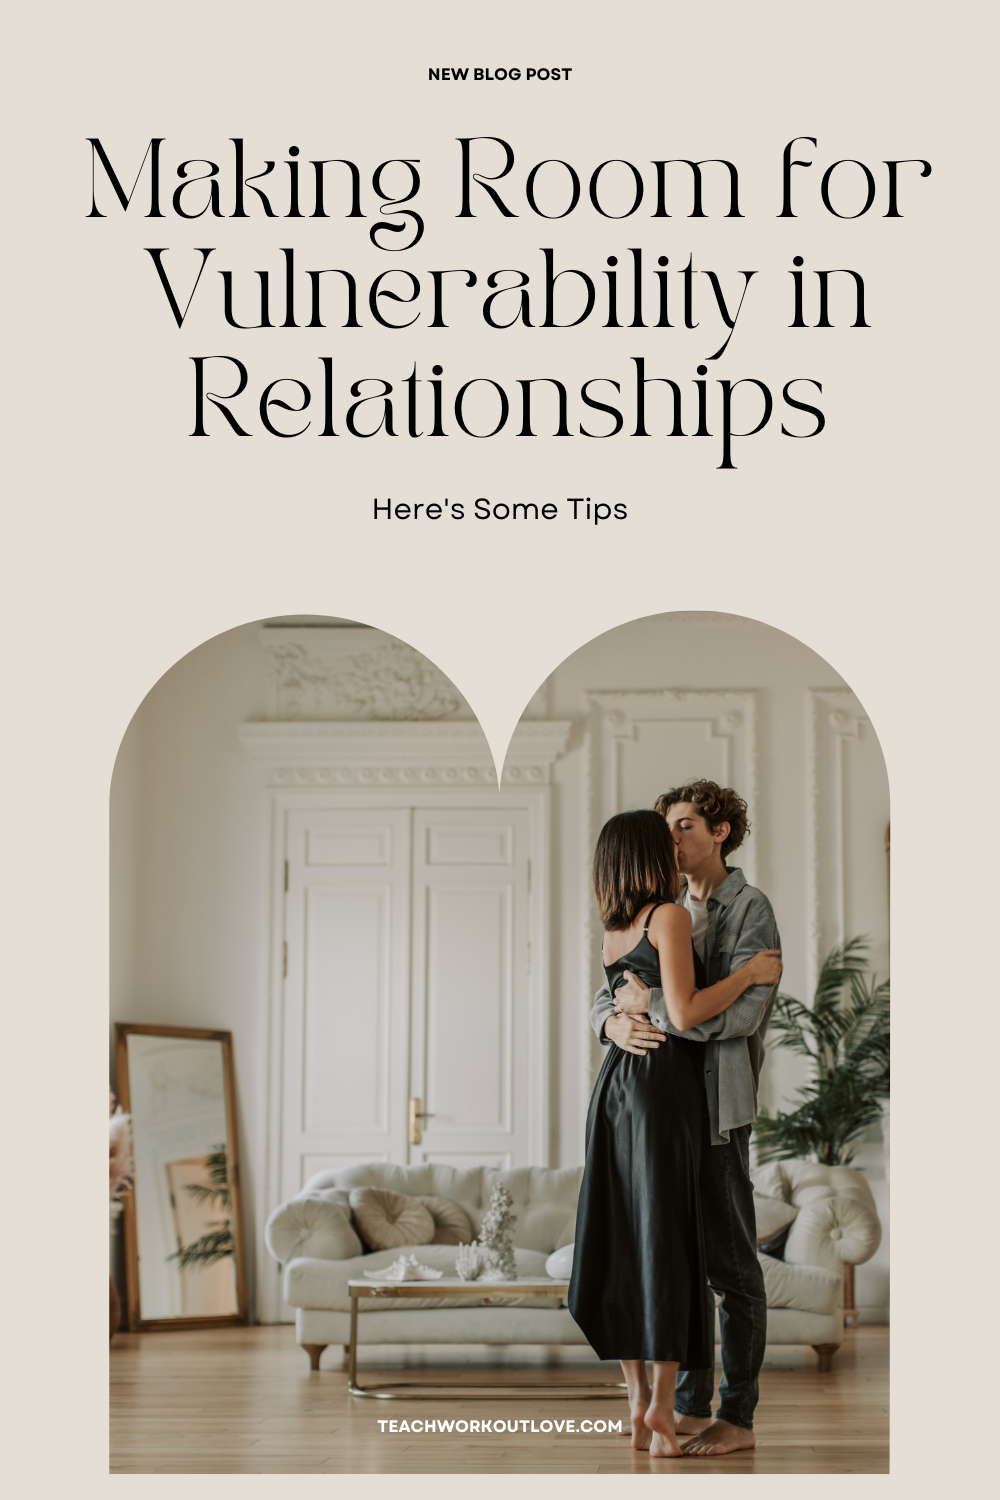 This article will explore why it's important to make room for vulnerability in relationships and how we can do so effectively.